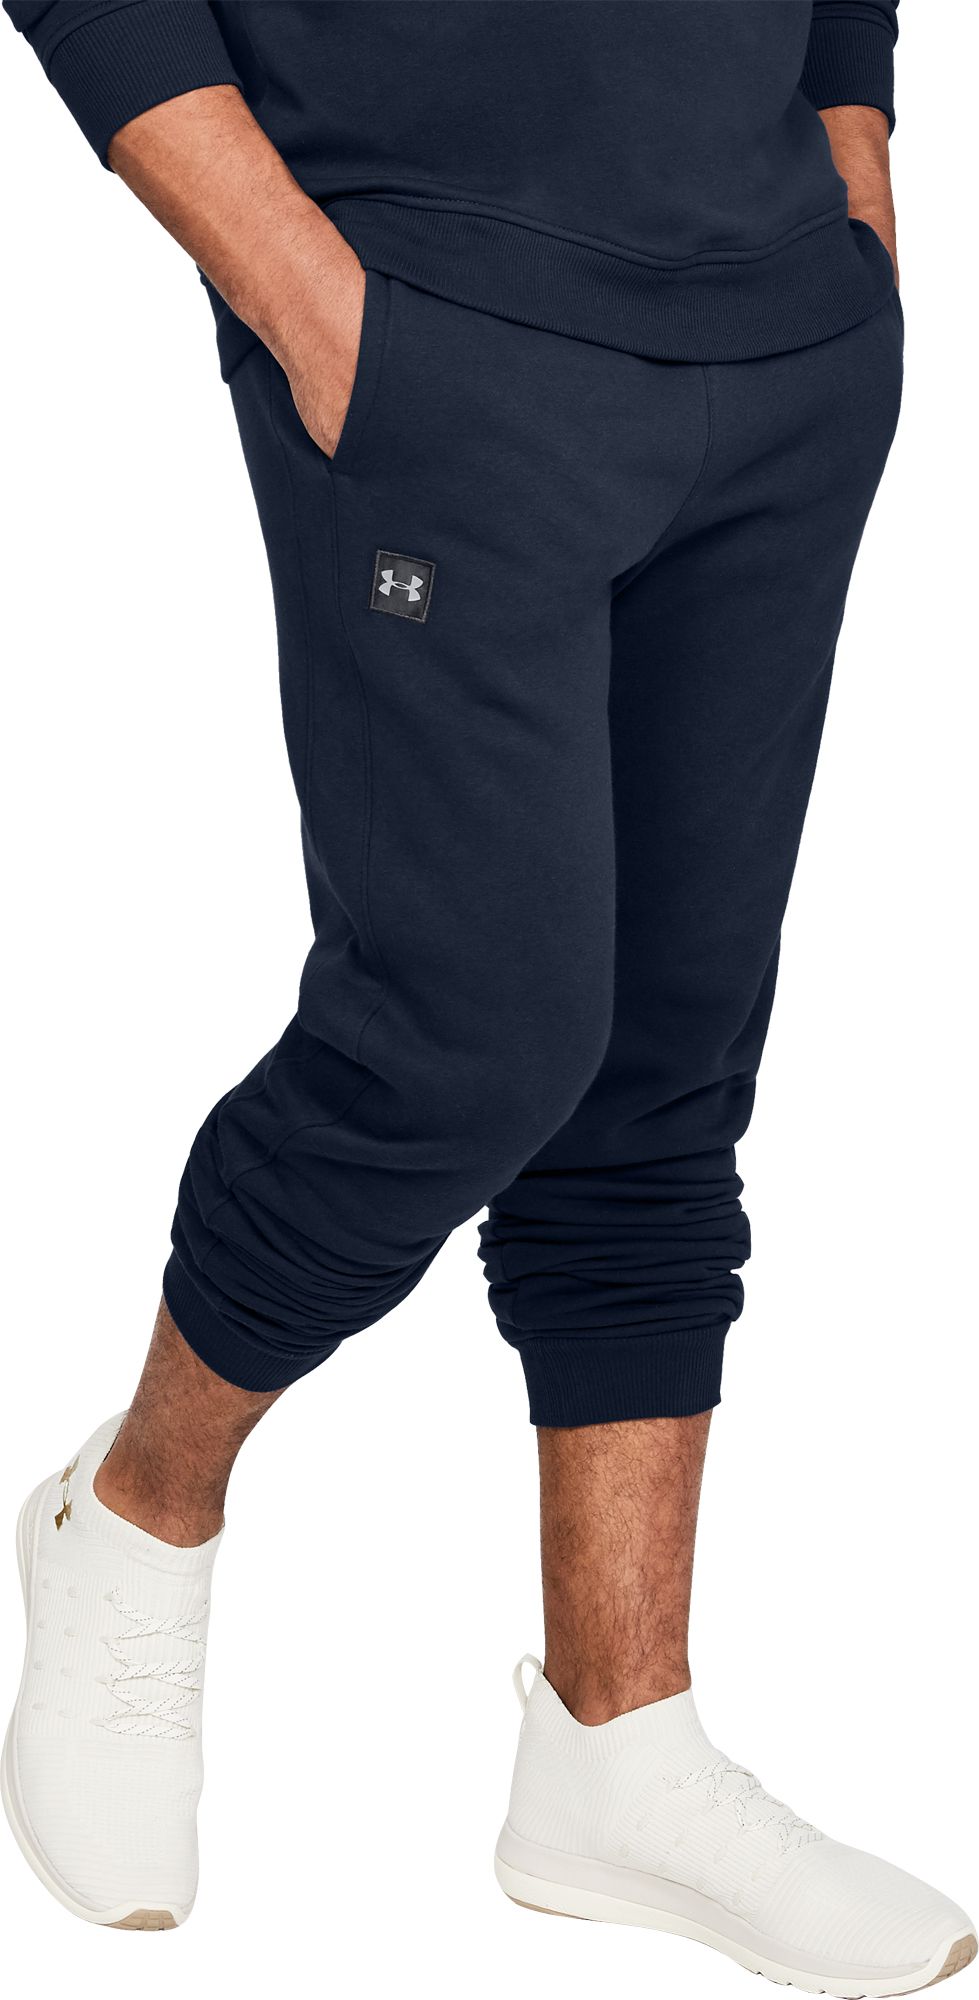 rival fitted tapered jogger